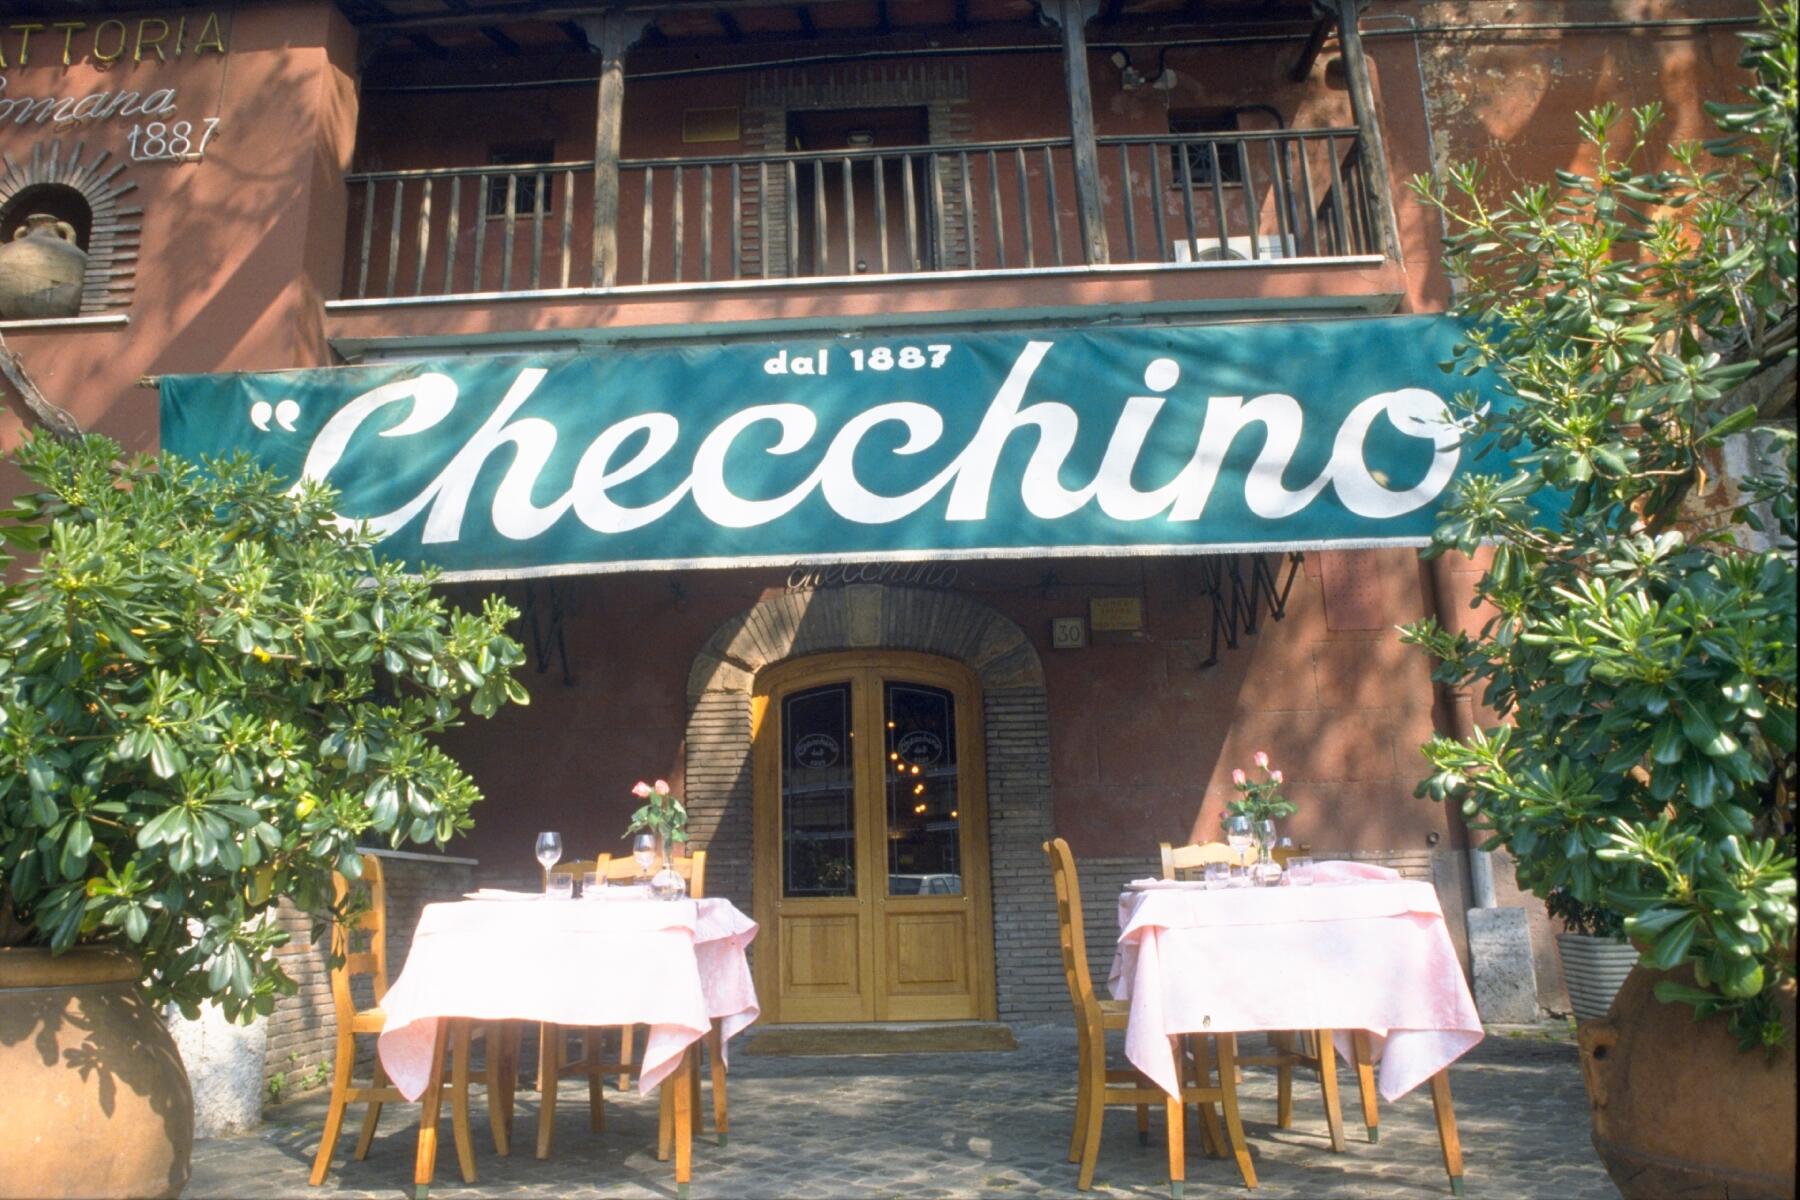 <a href='https://www.fodors.com/world/europe/italy/rome/experiences/news/photos/the-best-restaurants-in-rome#'>From &quot;The 20 Best Restaurants in Rome: Checchino dal 1887&quot;</a>